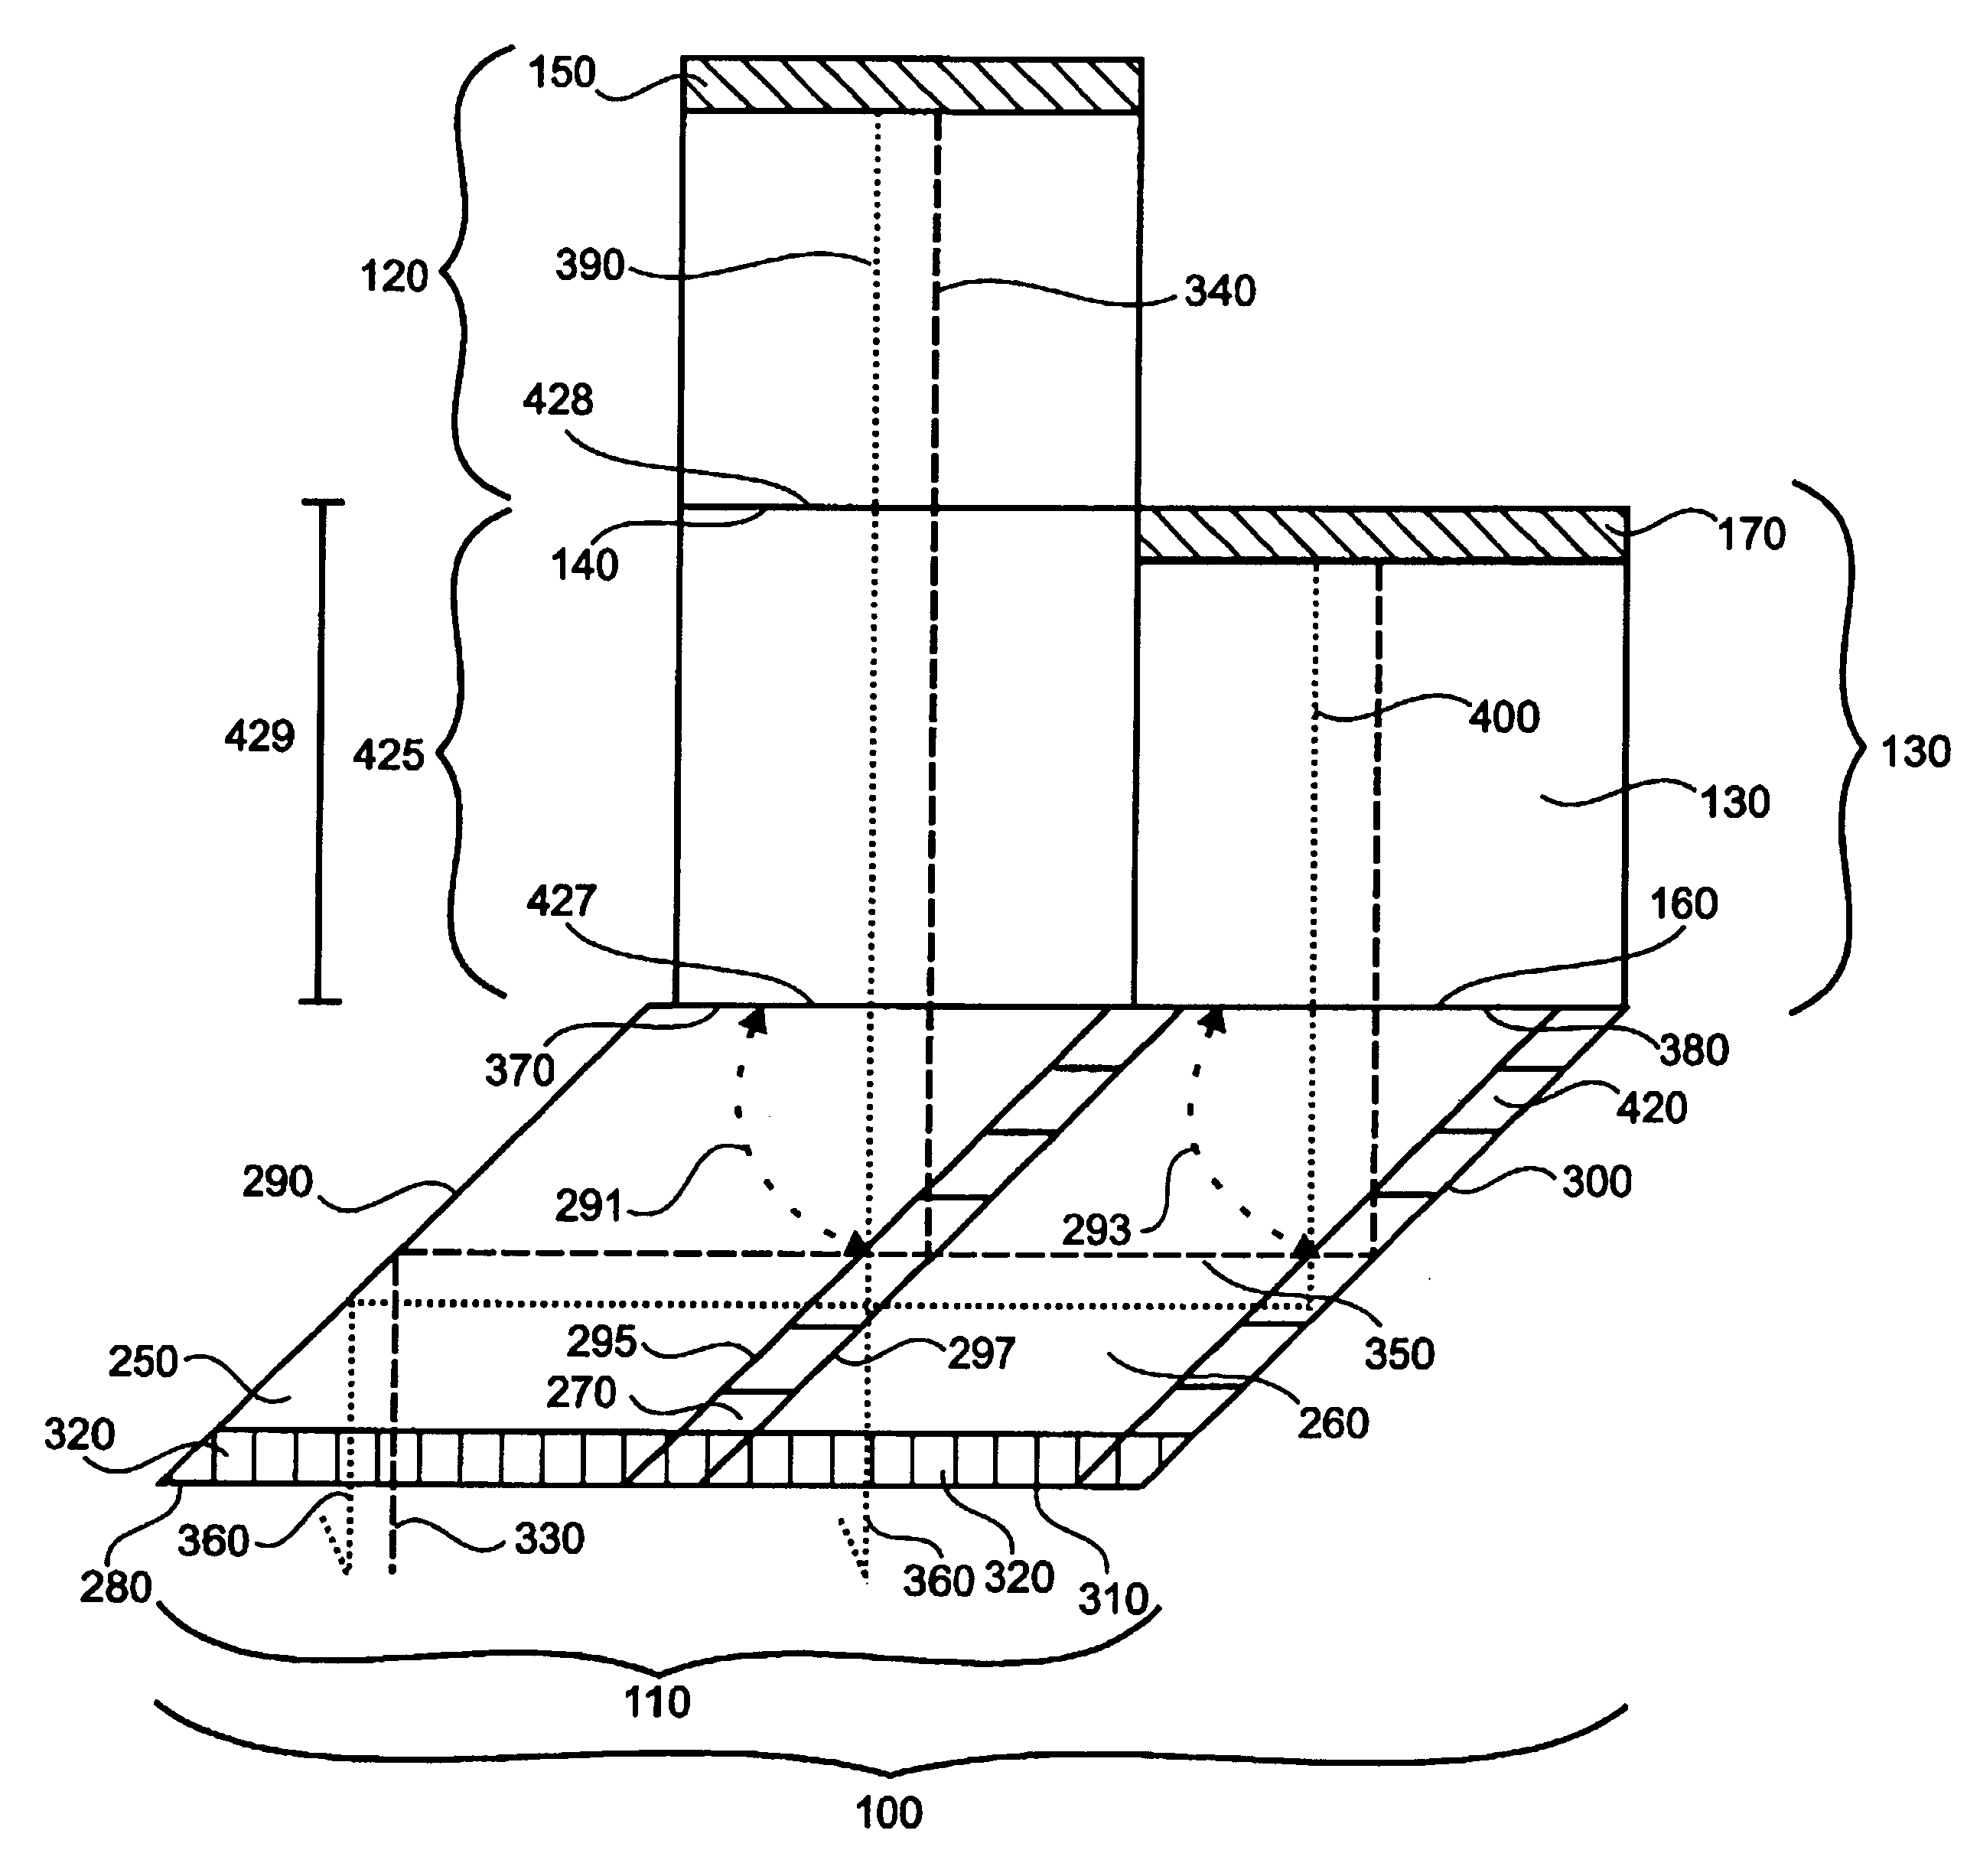 Optical interference filter having parallel phase control elements